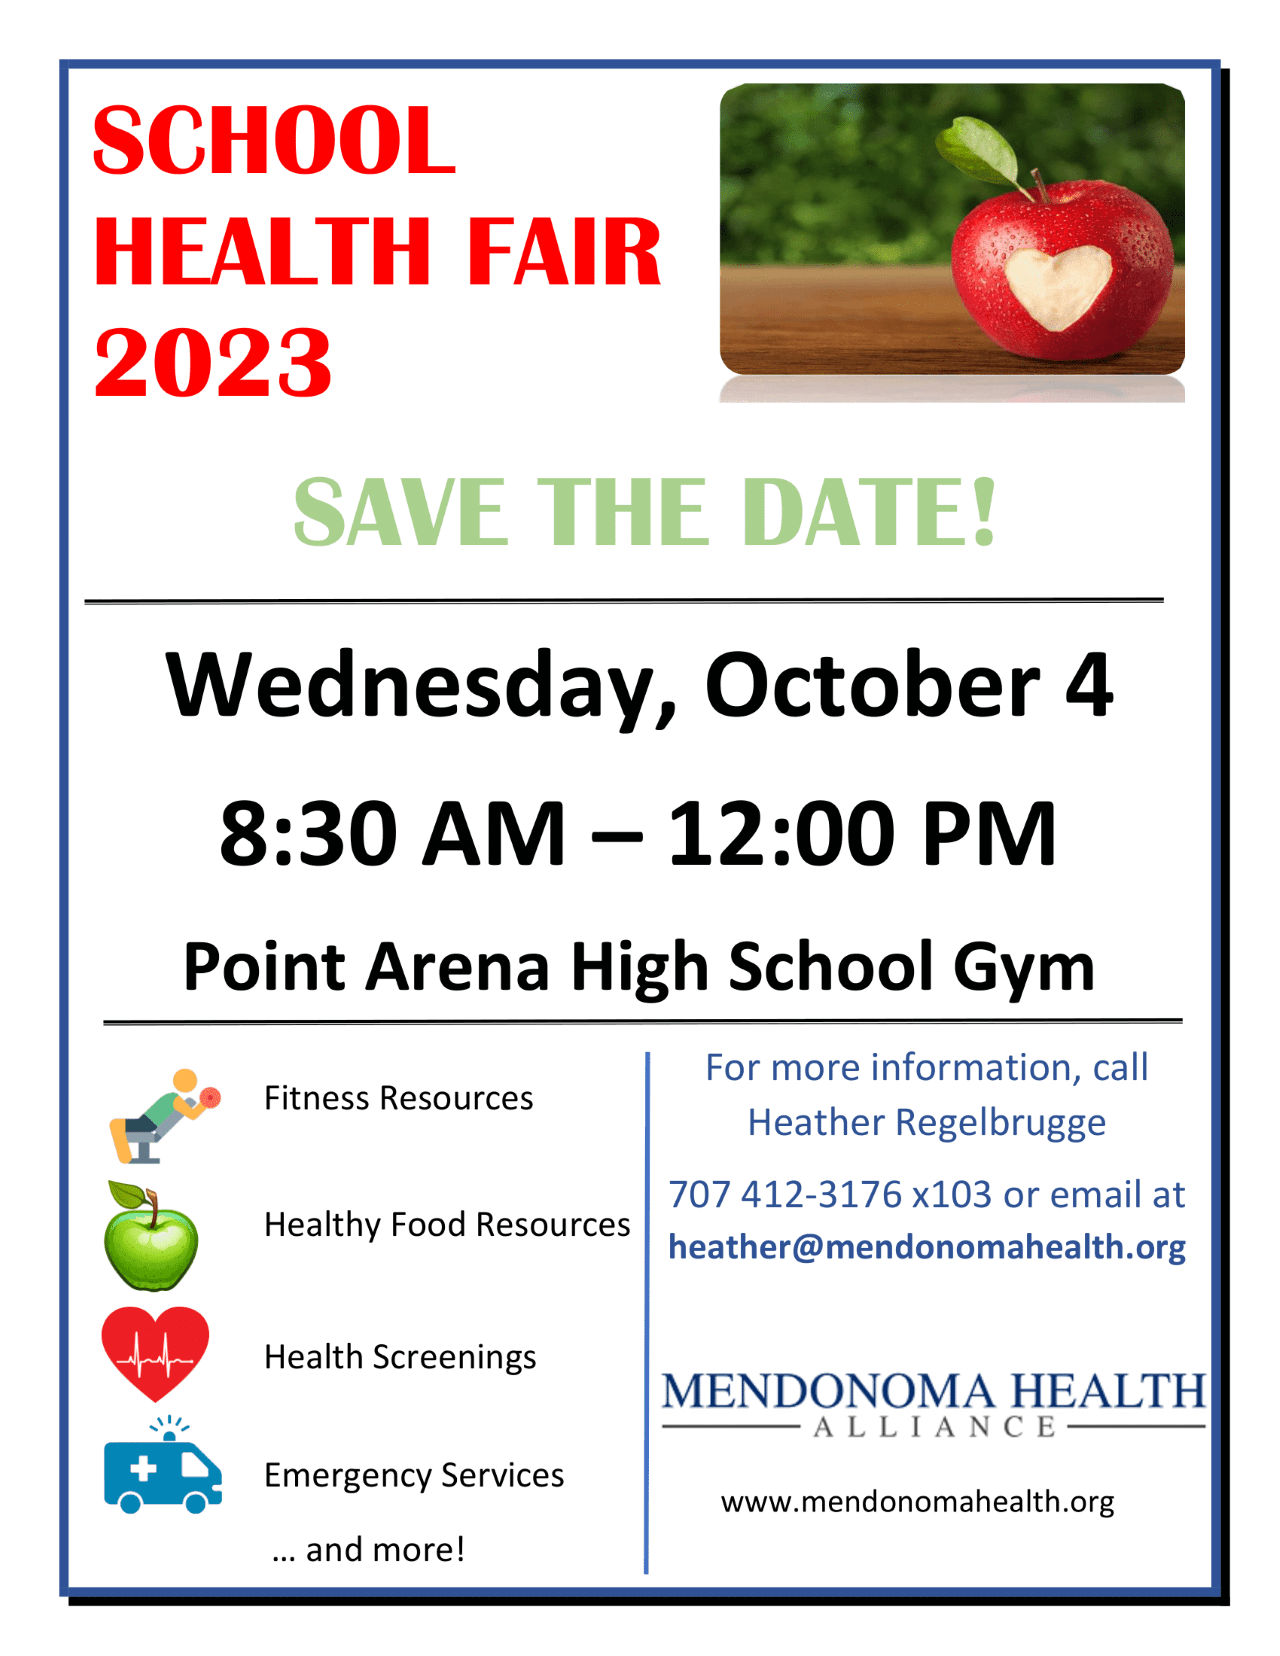 All School Health Fair. Red apple with a heart carved out in it. Cartoon people exercising, green apple, red heart and blue ambulance. 10/4/23